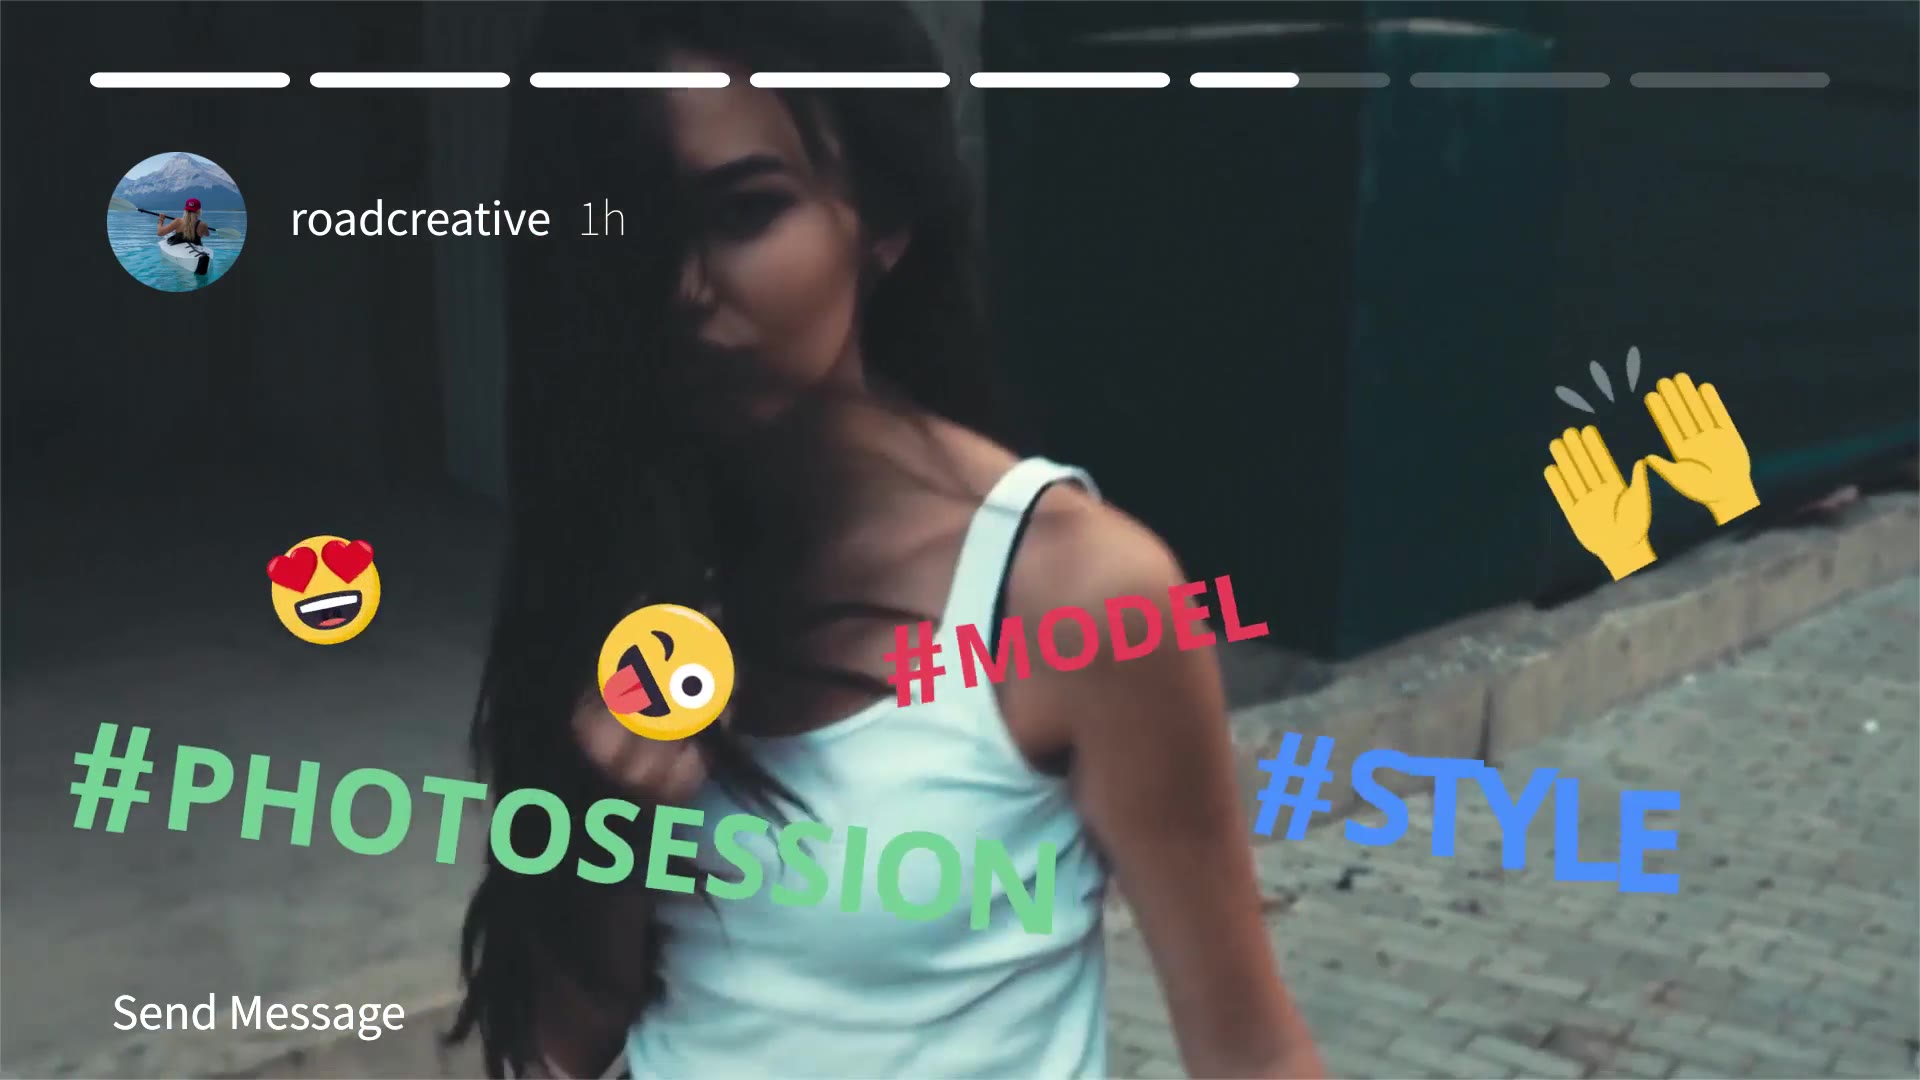 Instagram Story - Download Videohive 20084293